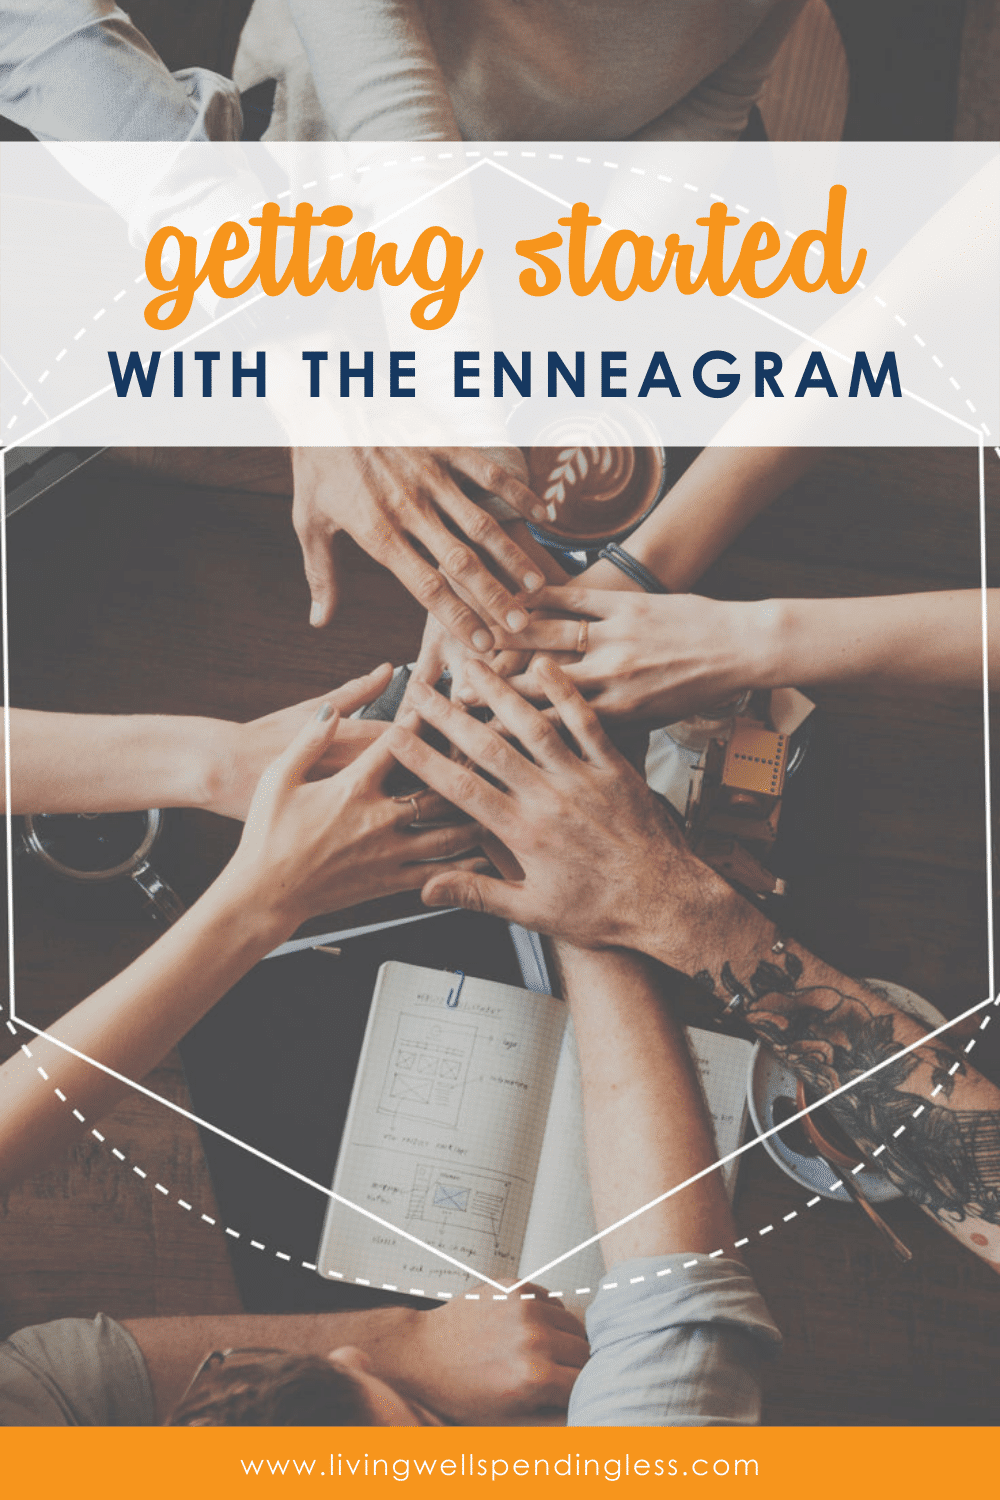 Enneagram-Getting-Started-Pin-1